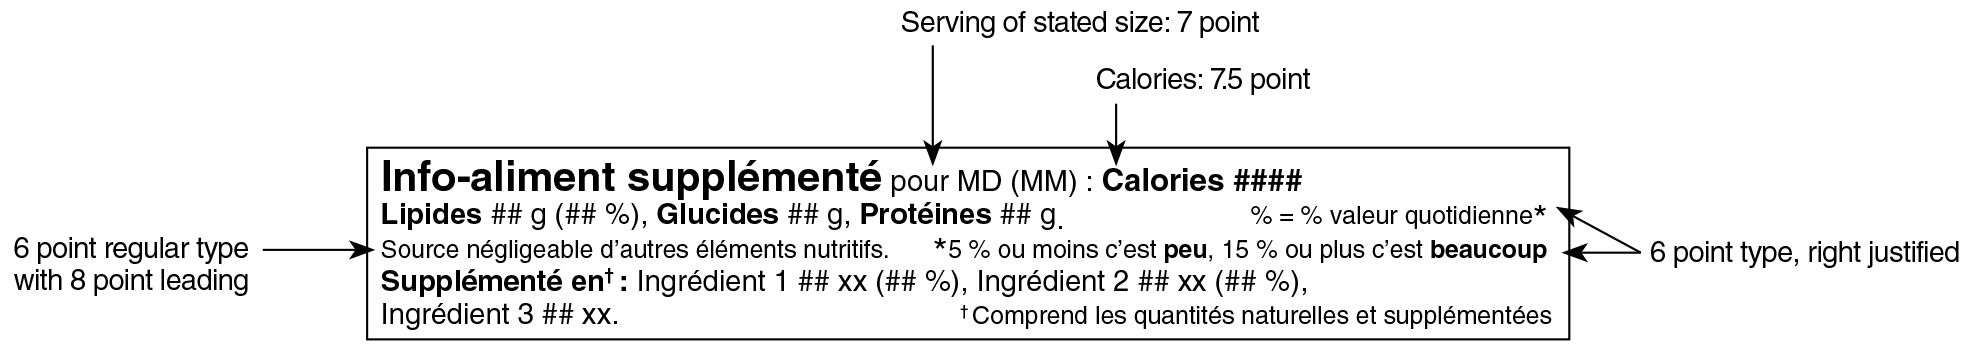 A French Supplemented Food Facts table in simplified linear format surrounded by specifications. Text version below.